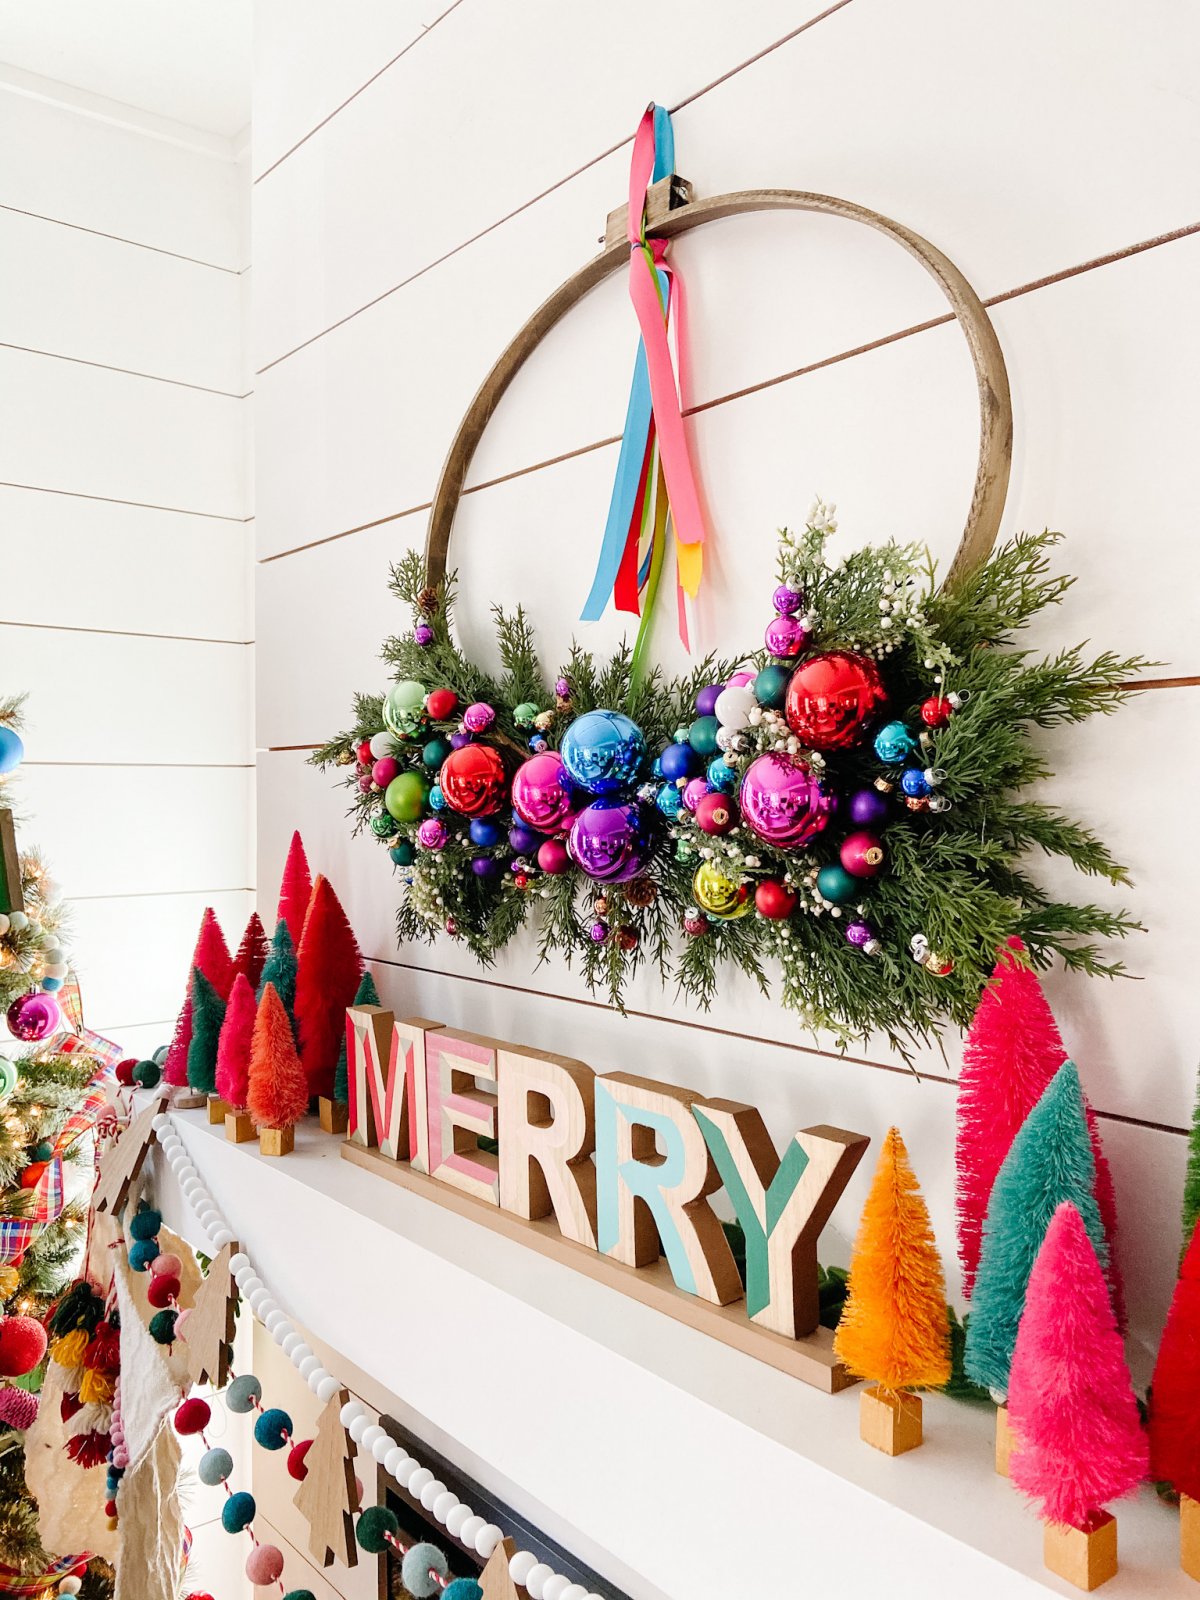 Bright Colorful Merry Mantel. Create colorful holiday cheer with a bright garland, little bottlebrush trees and an embroidery hoop ornament wreath!